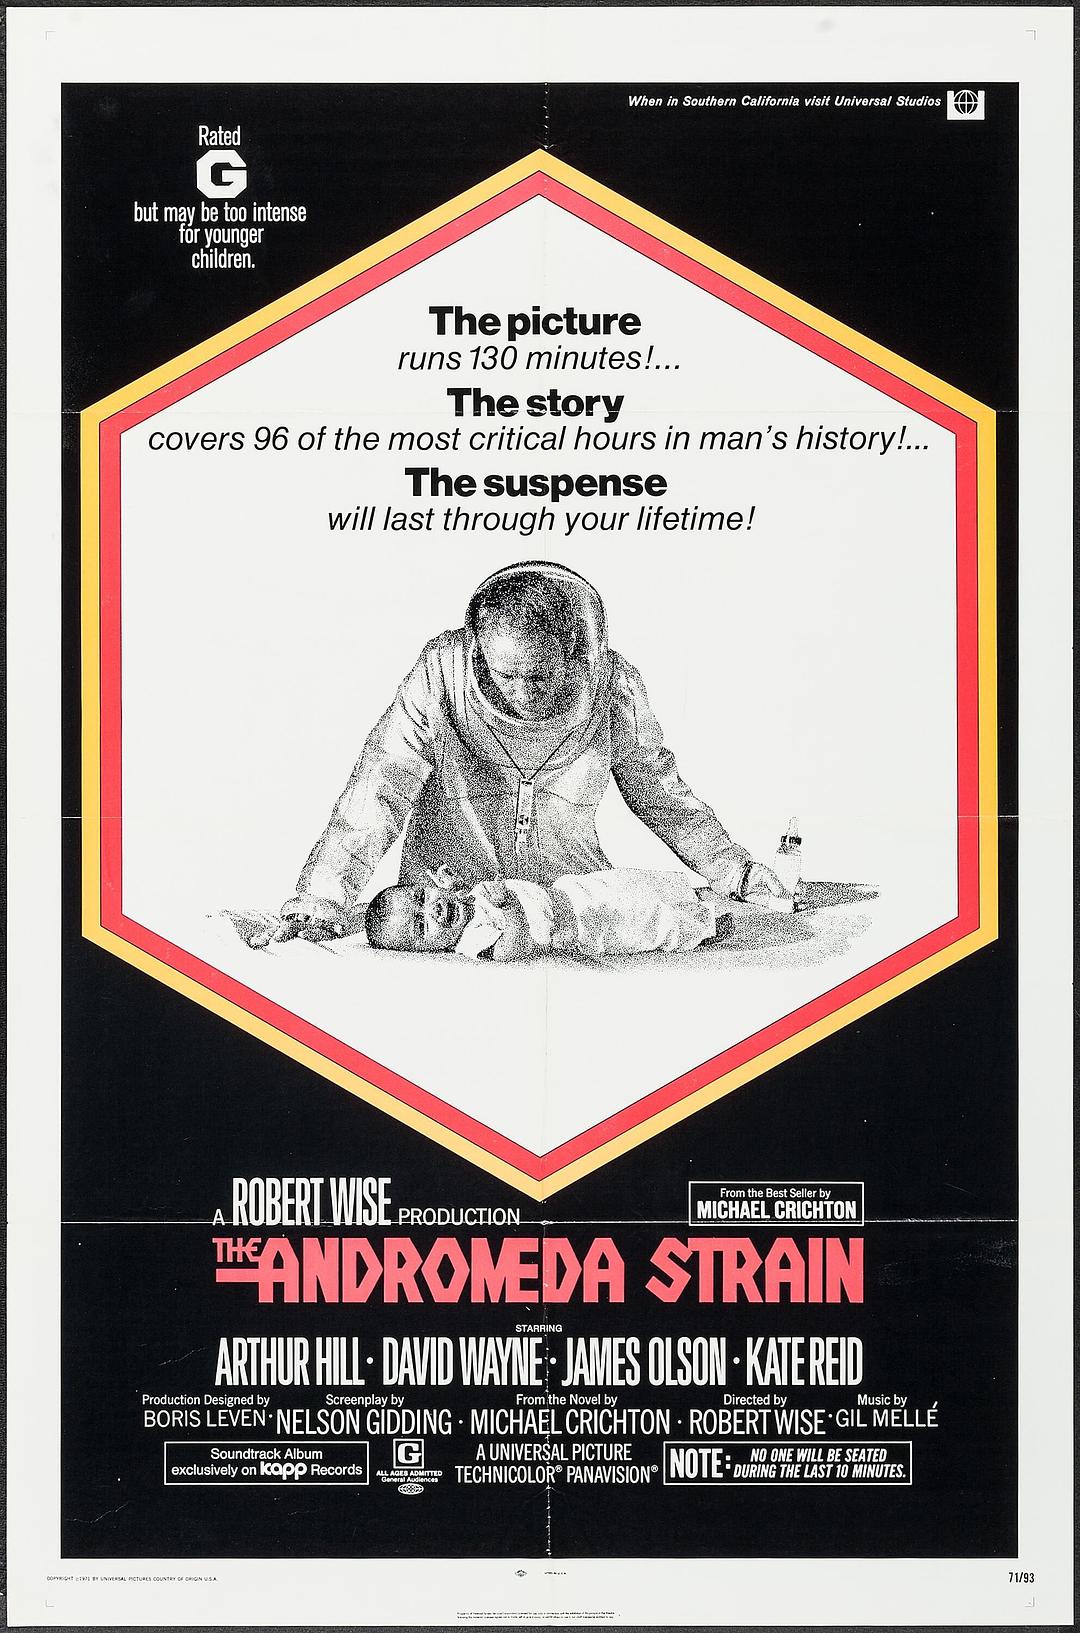 ˼ƽ/Ů The.Andromeda.Strain.1971.REMASTERED.1080p.BluRay.REMUX.AVC.LPCM.1.0-1.png